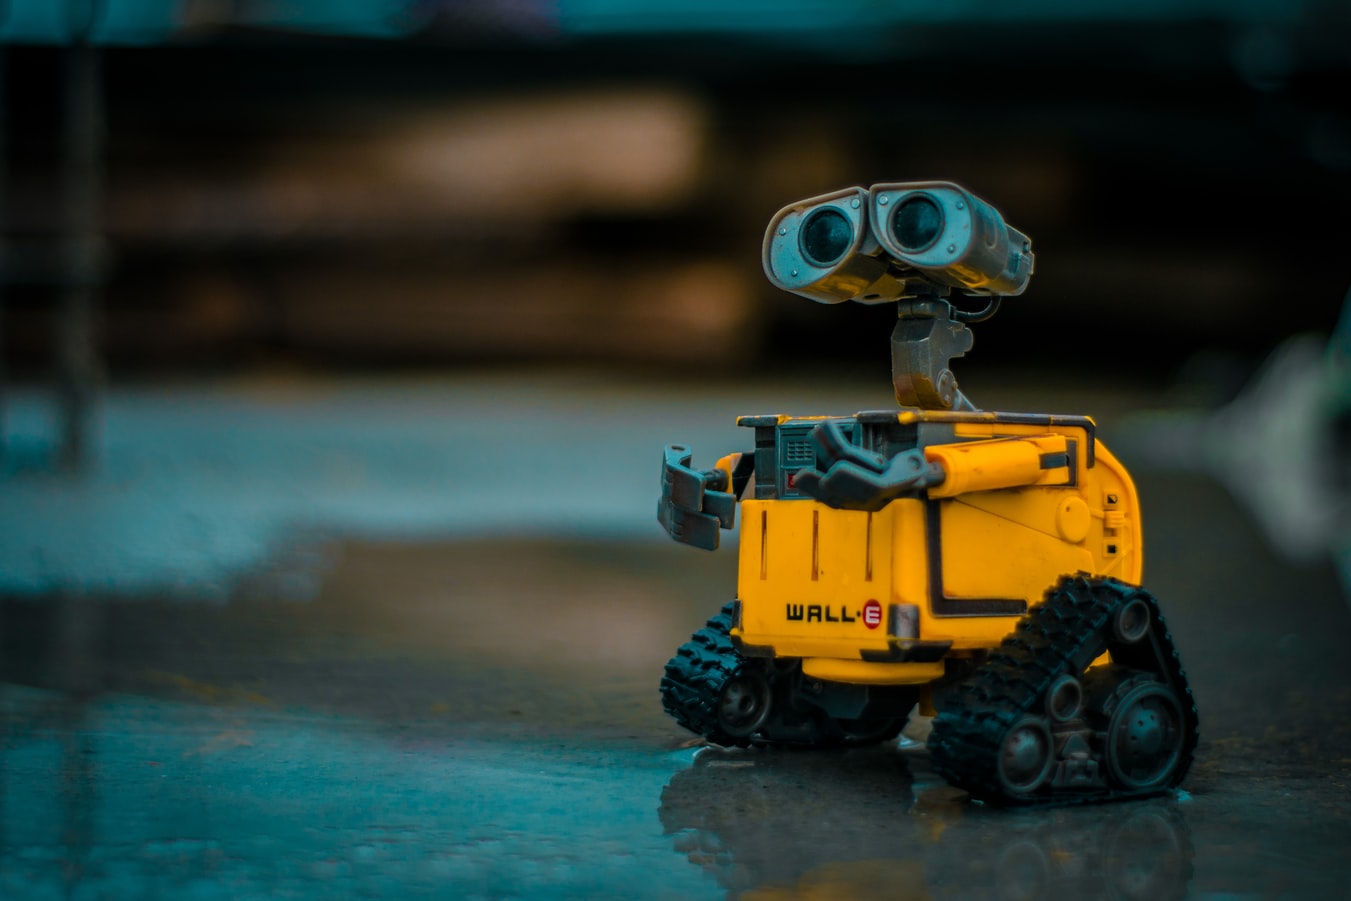 Small Wall E styled Robot. 